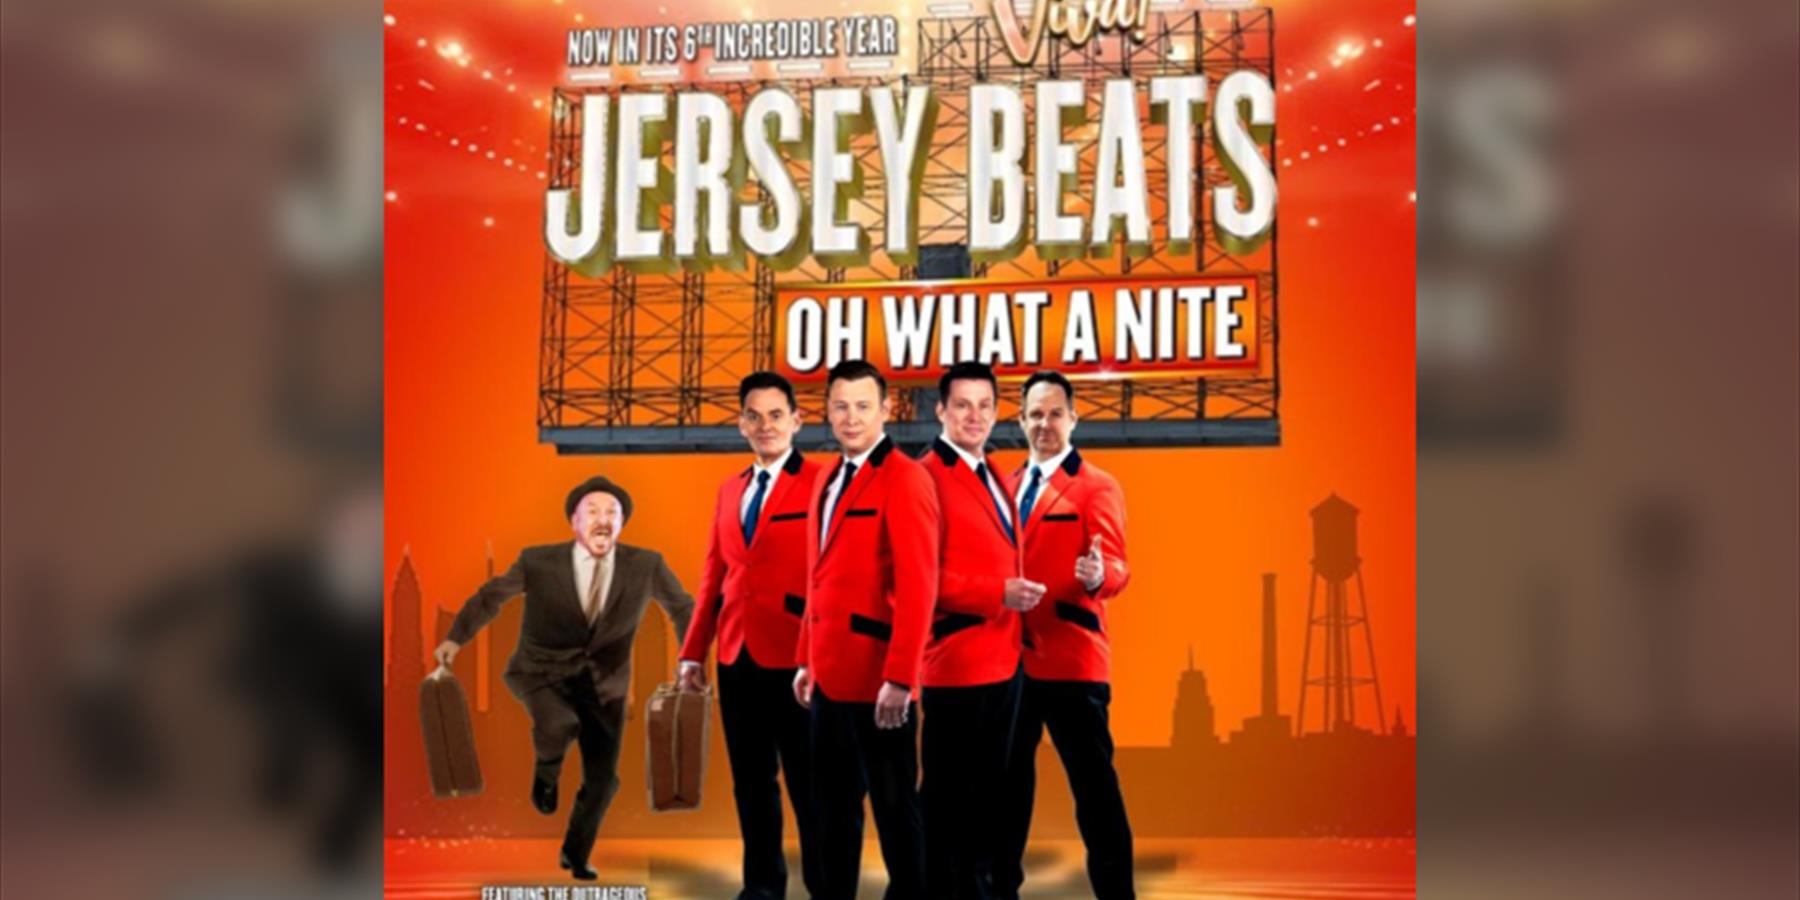 The Jersey Beats - Oh What A Nite!